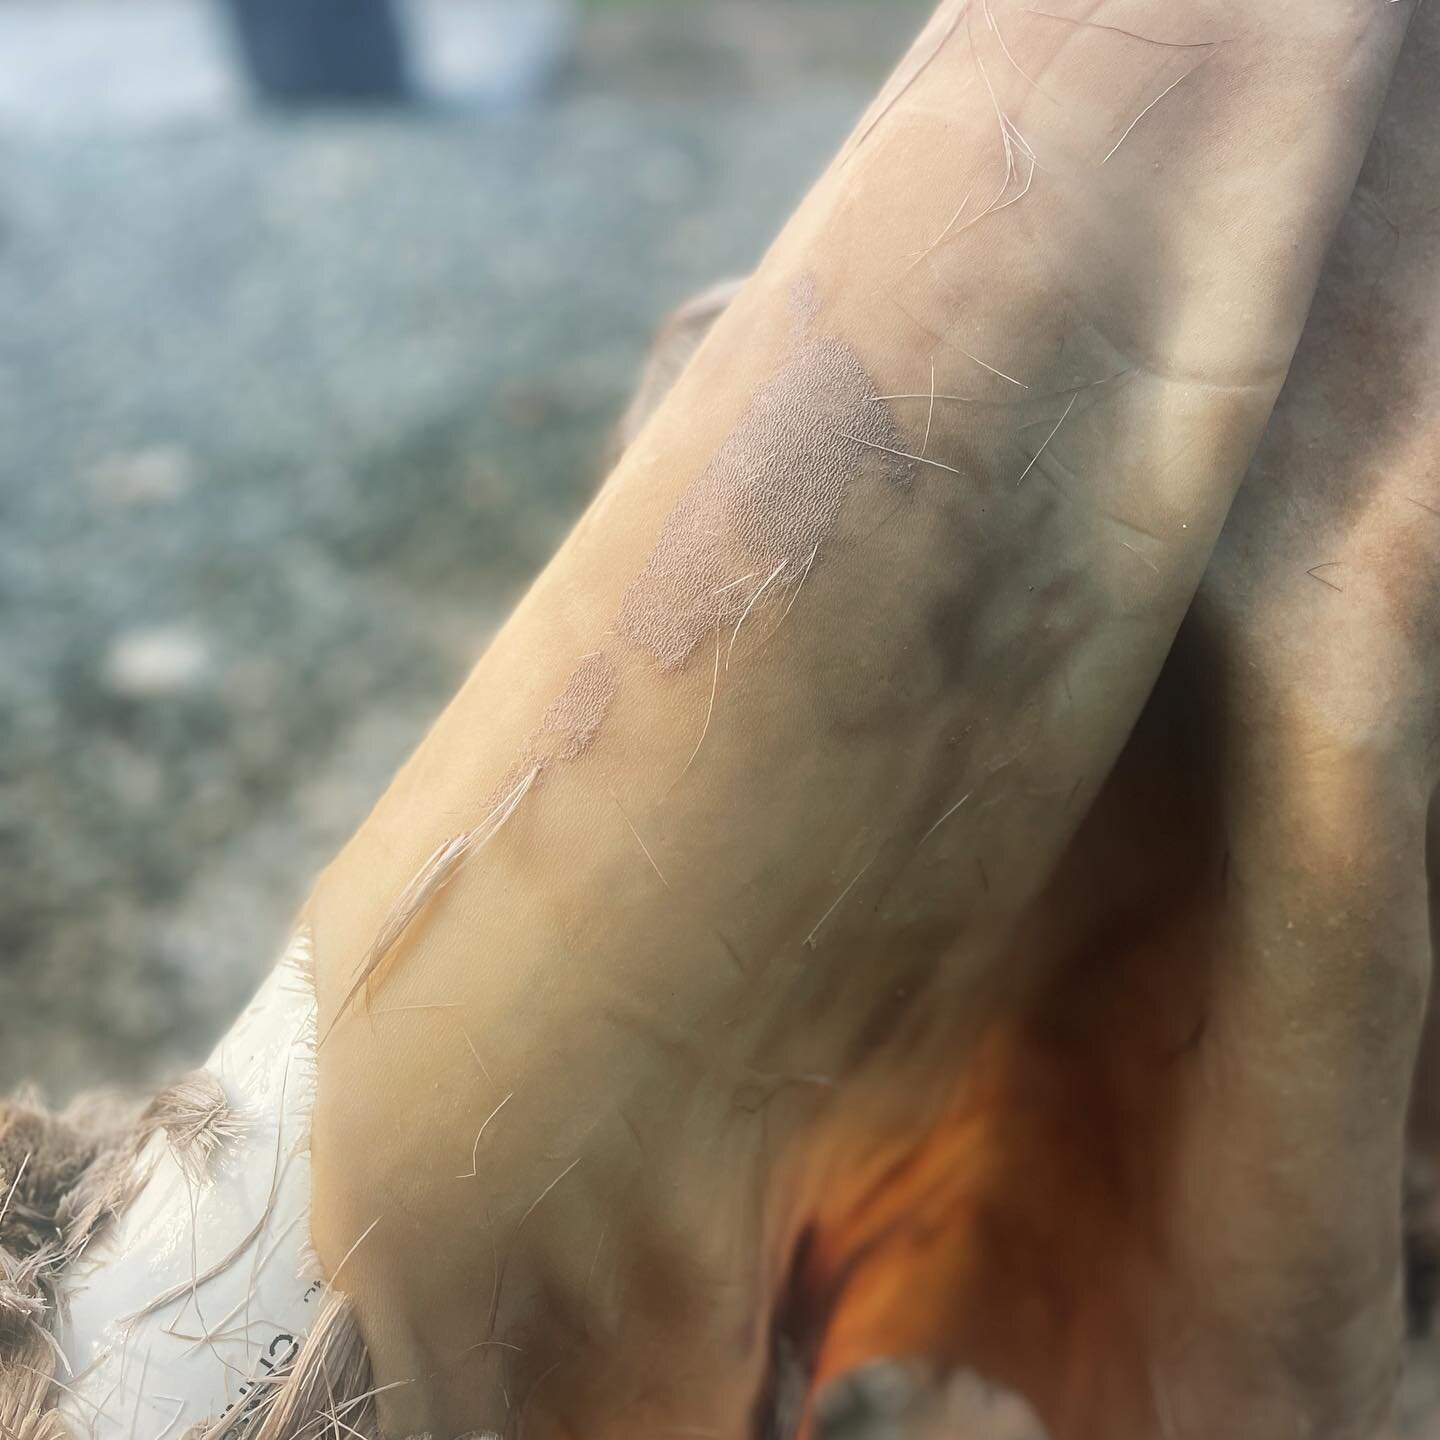 Grain + epidermis: I sometimes hear people use these terms interchangeably, but one &ne; the other 

This is a deer hide I&rsquo;m scraping, leaving the grain intact to make rawhide.  That grey fluff on the surface is the epidermis, a super thin coat